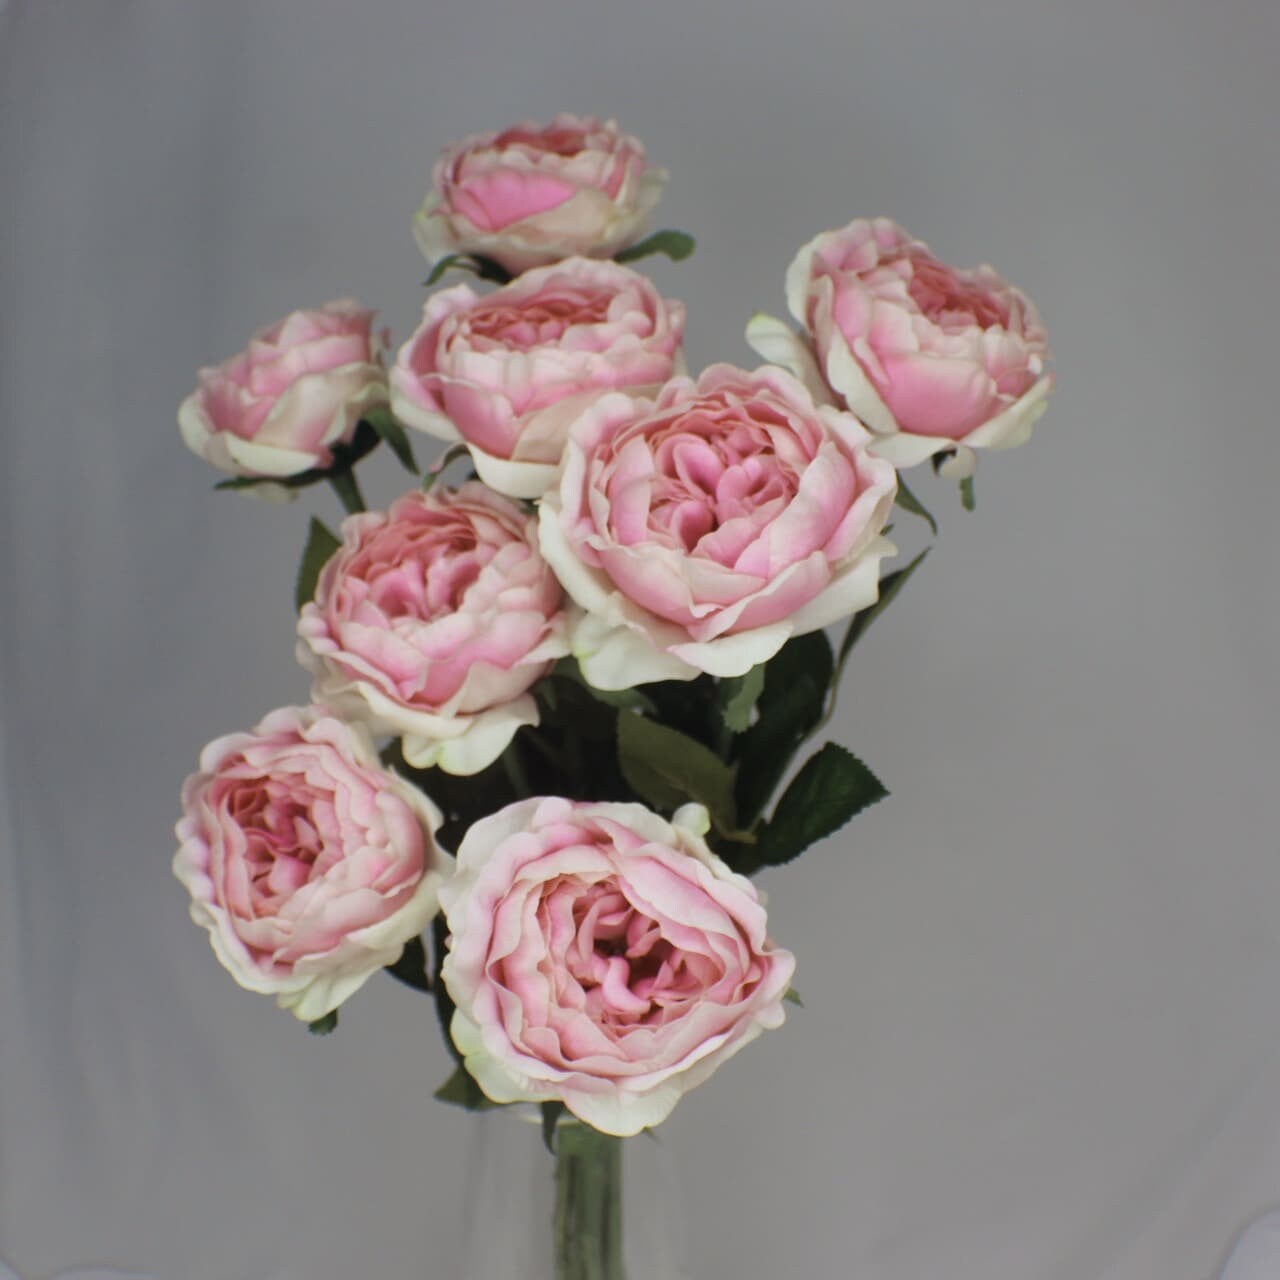 artificial half bloom pink ice roses placed in transparent glass vase